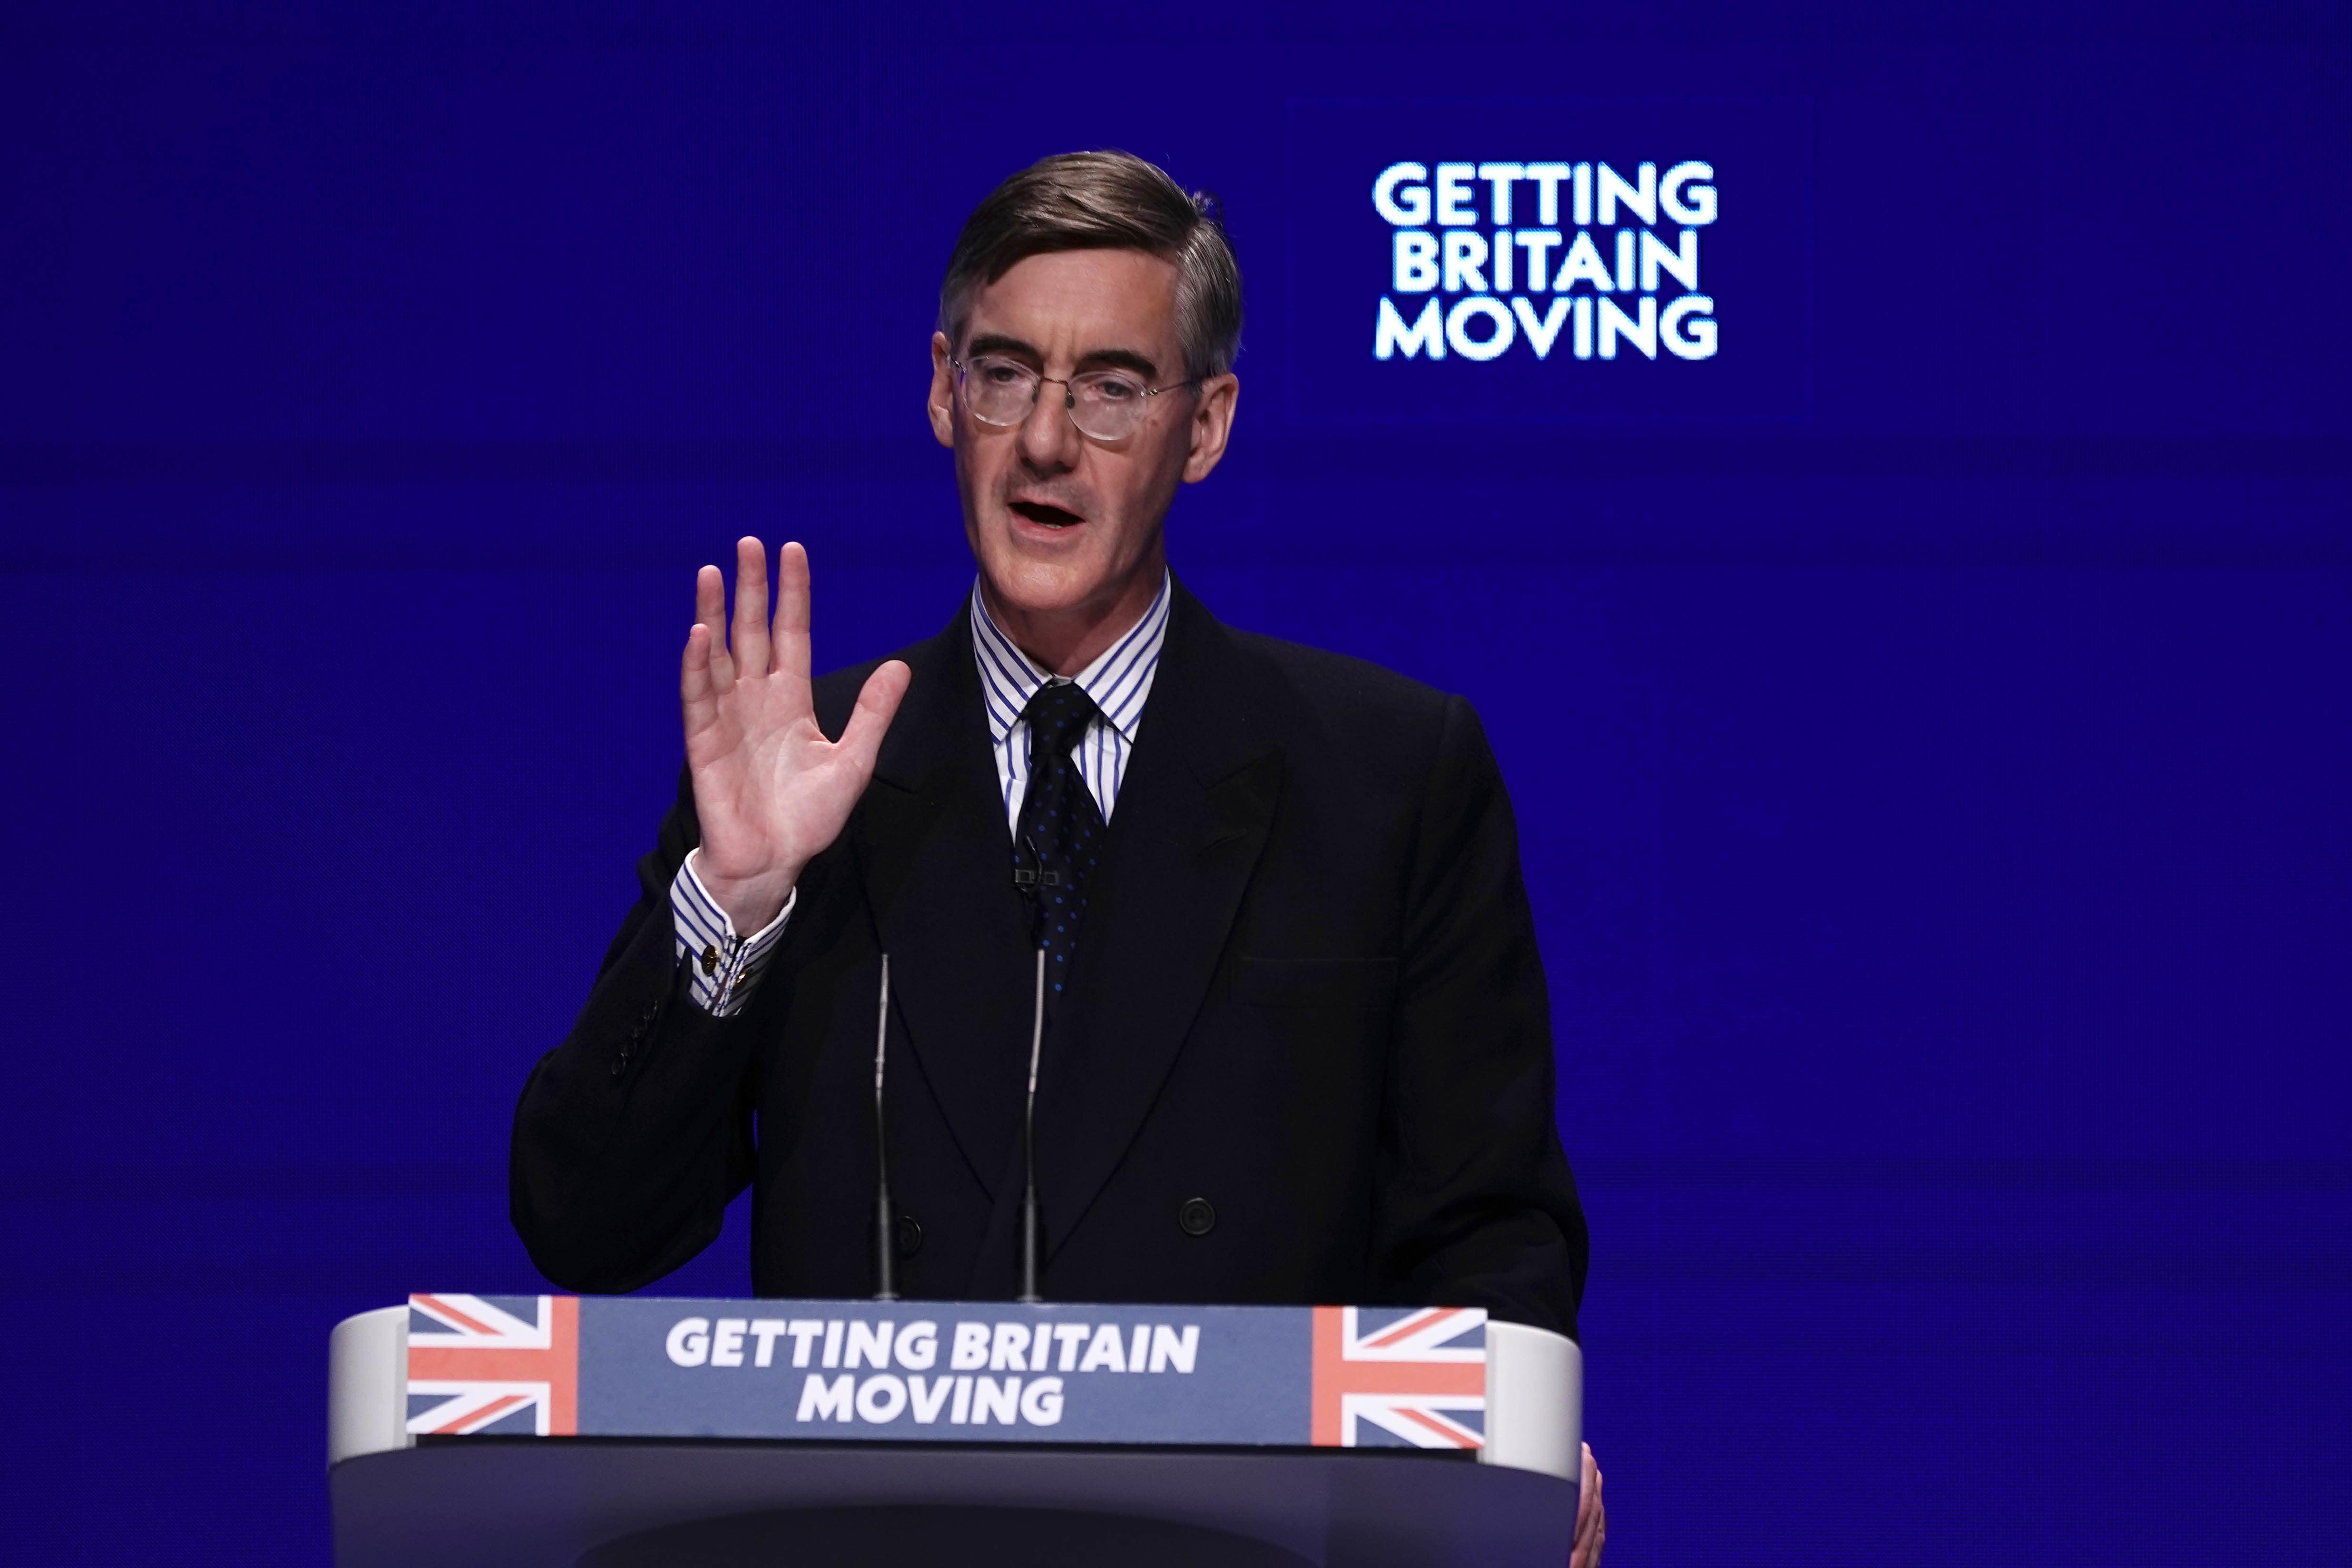 Jacob Rees-Mogg speaking at the Conservative Party annual conference at the International Convention Centre in Birmingham (Aaron Chown/PA)